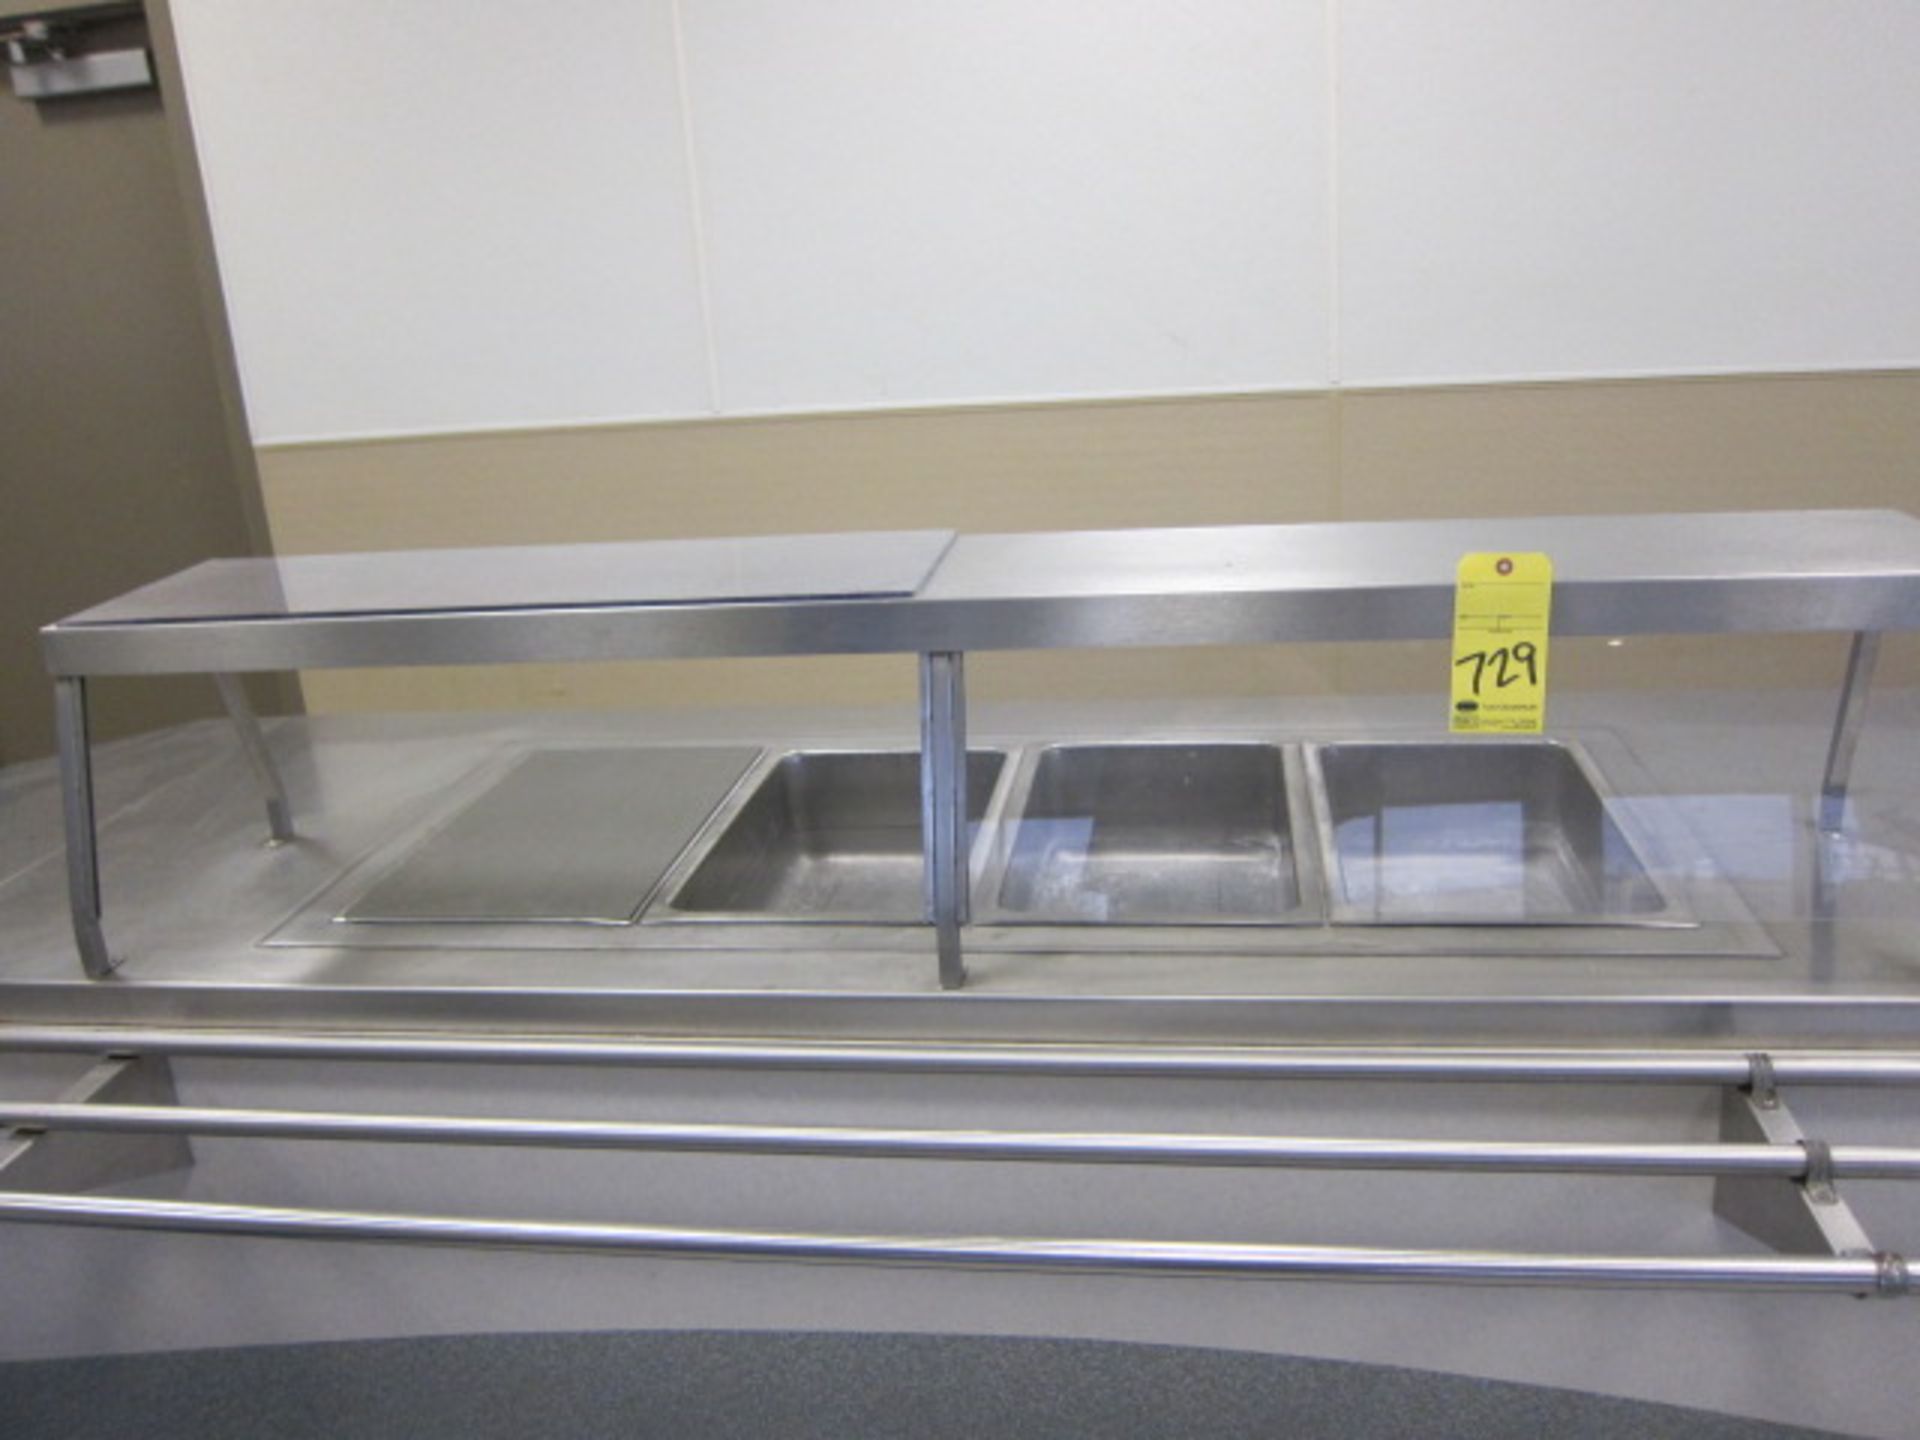 STAINLESS STEEL CAFETERIA LINE w/tray rail, built-in steam table pans & salad station - Image 4 of 10